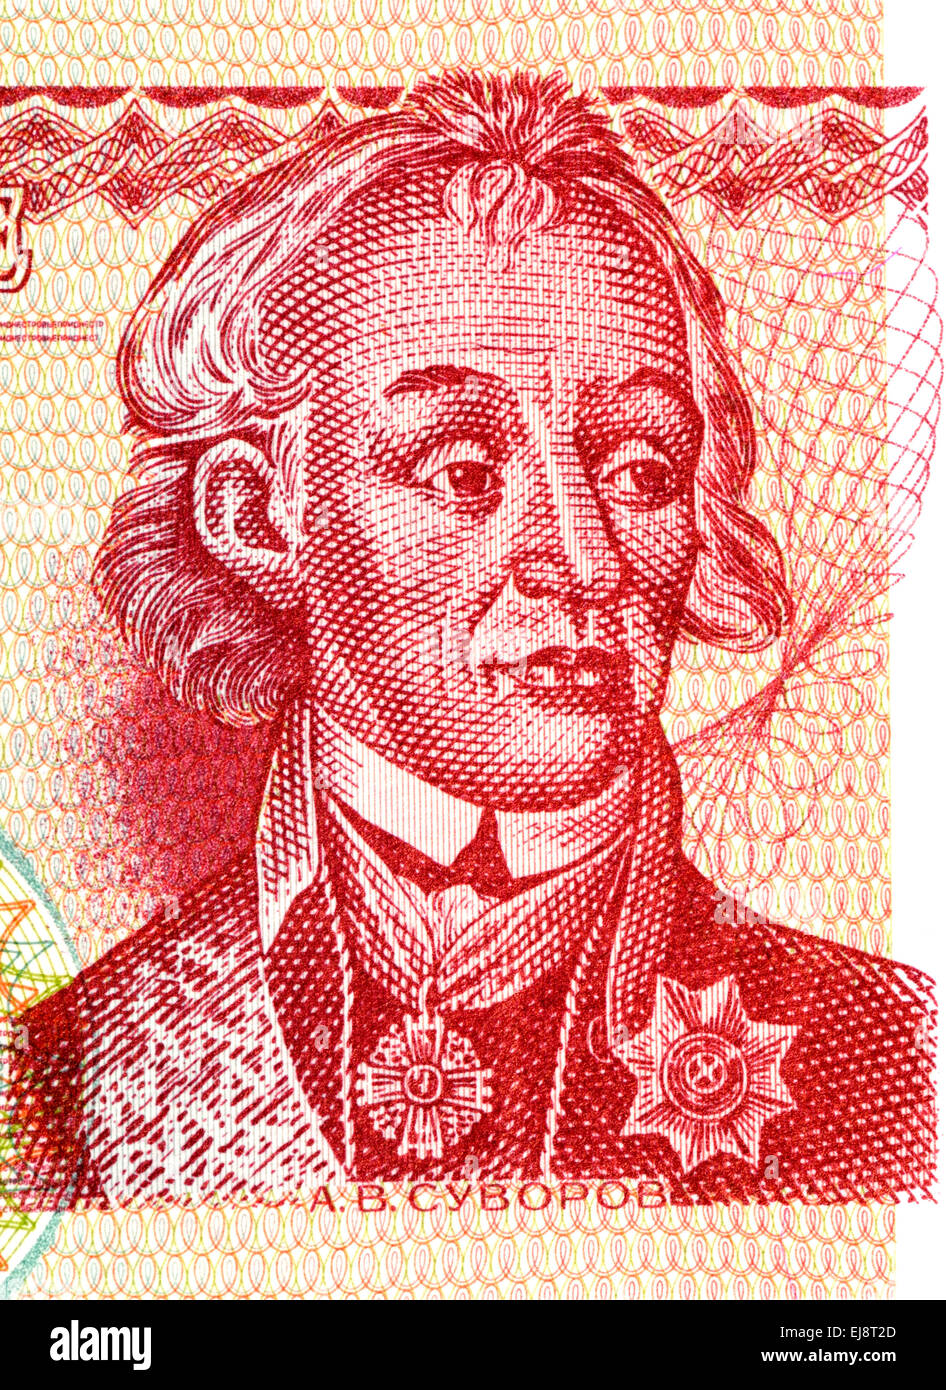 Detail from a Transnistrian banknote showing portrait of Alexander Suvorov, Russian military leader Stock Photo